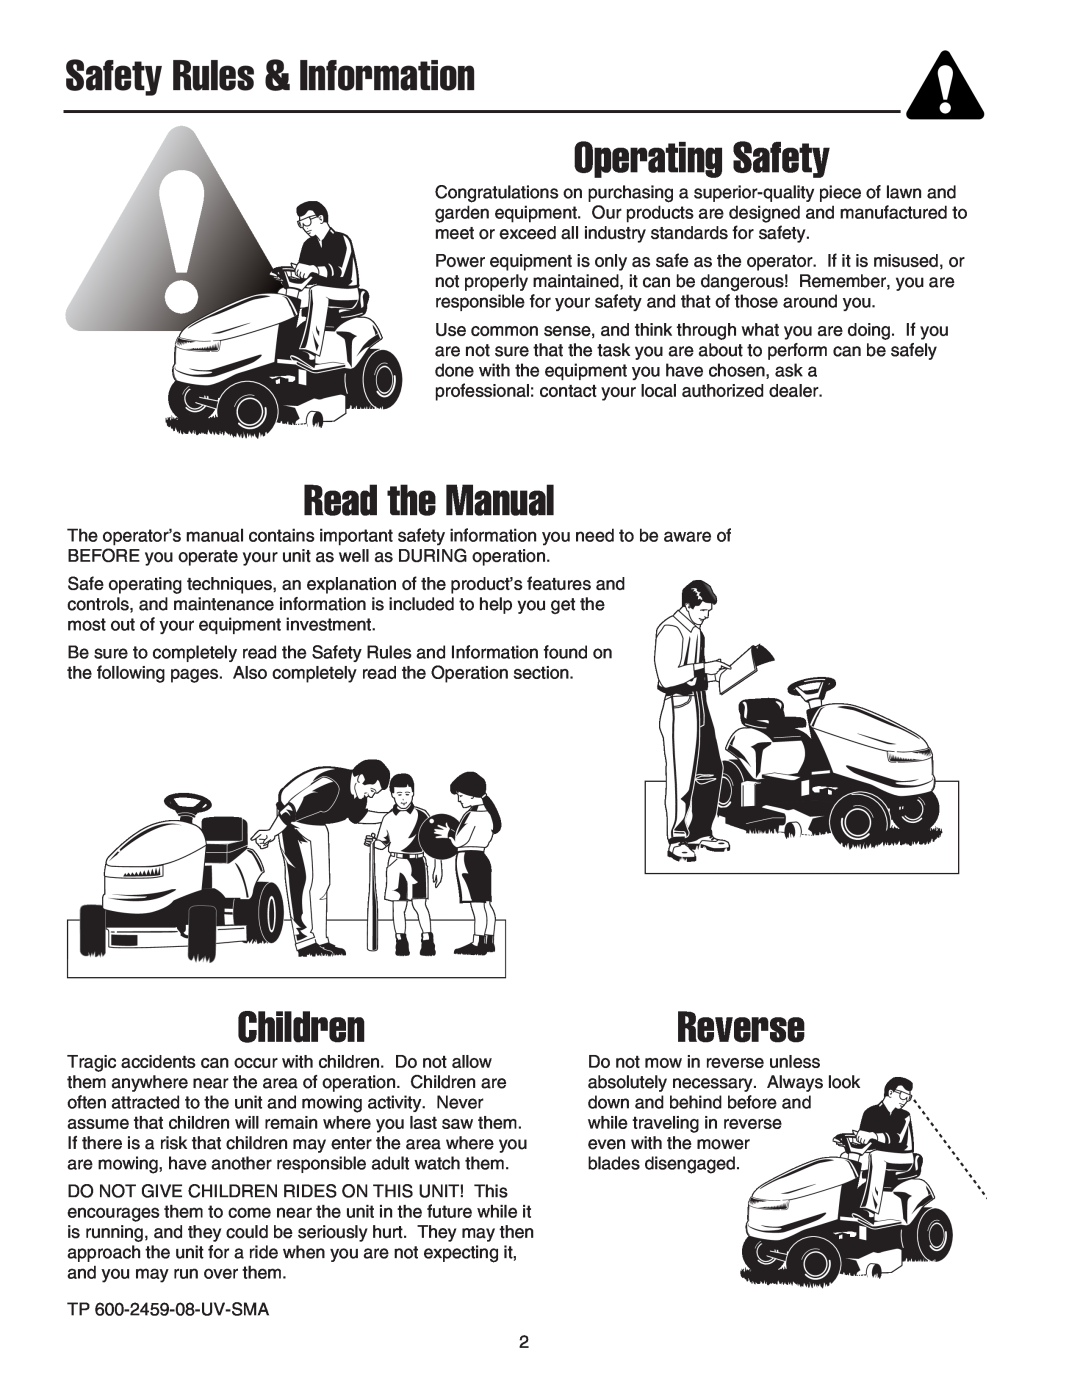 Snapper LT-200 manual Safety Rules & Information Operating Safety, Read the Manual, ChildrenReverse 